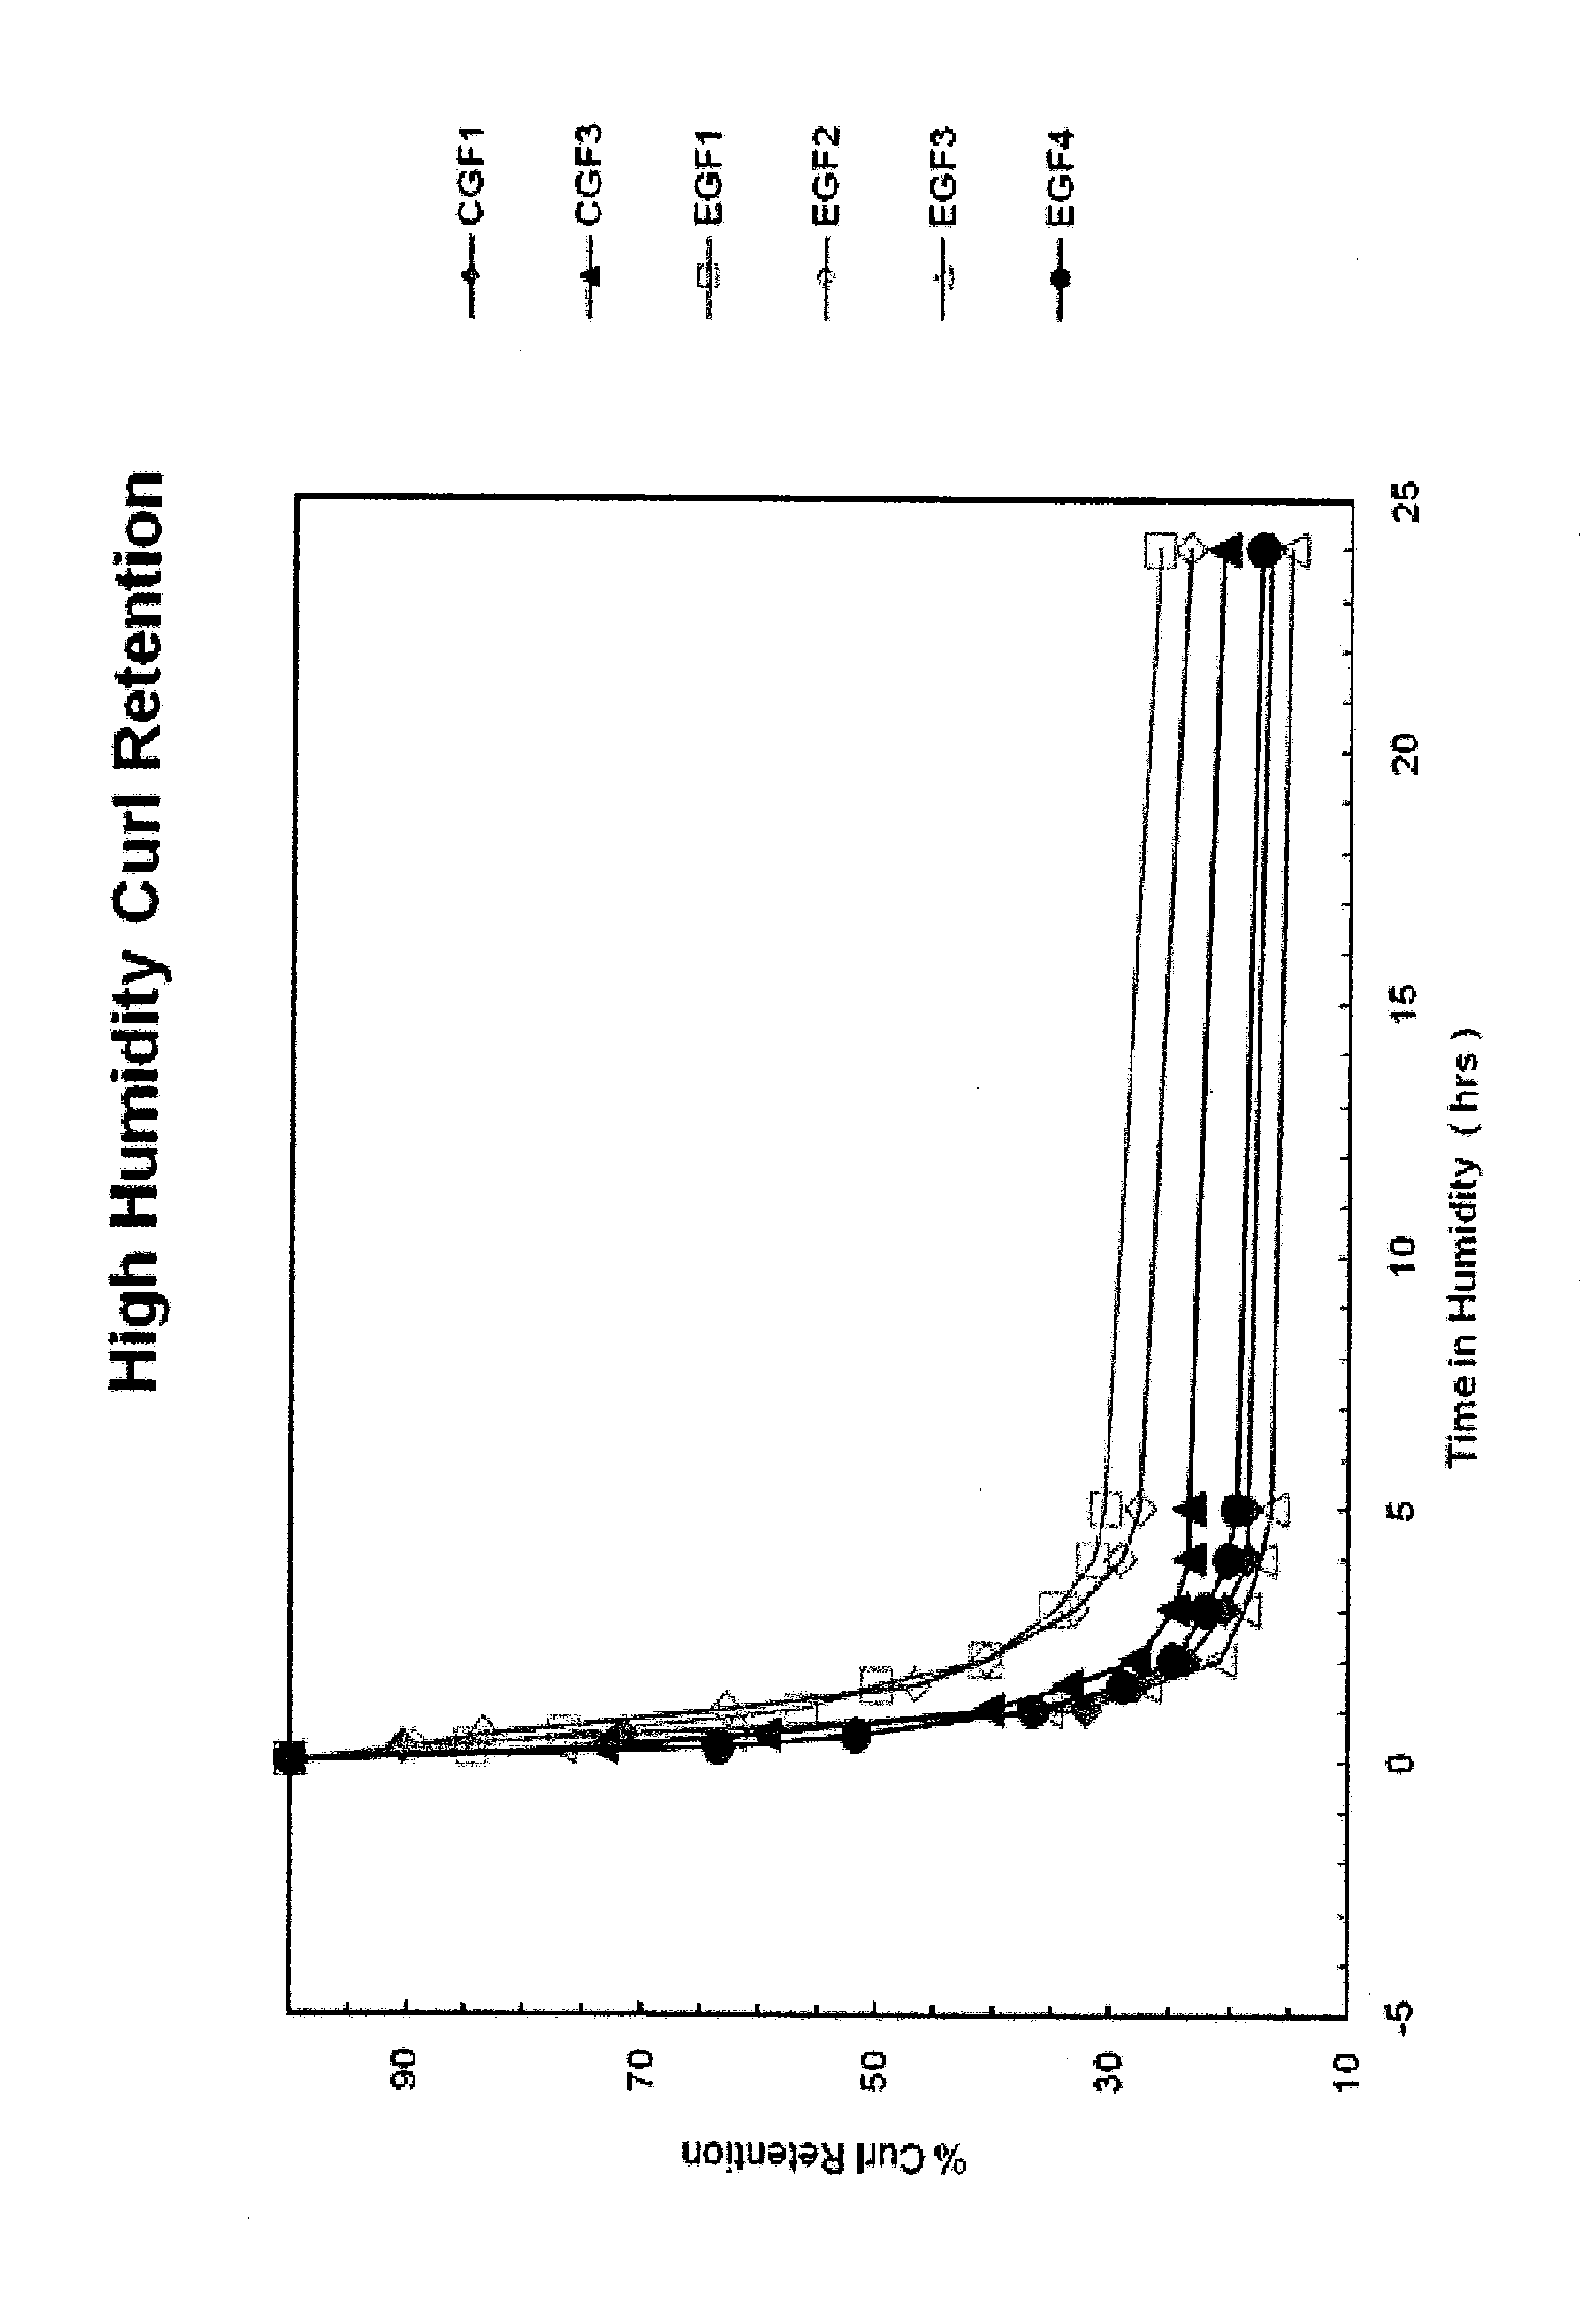 Hybrid copolymer compositions for personal care applications